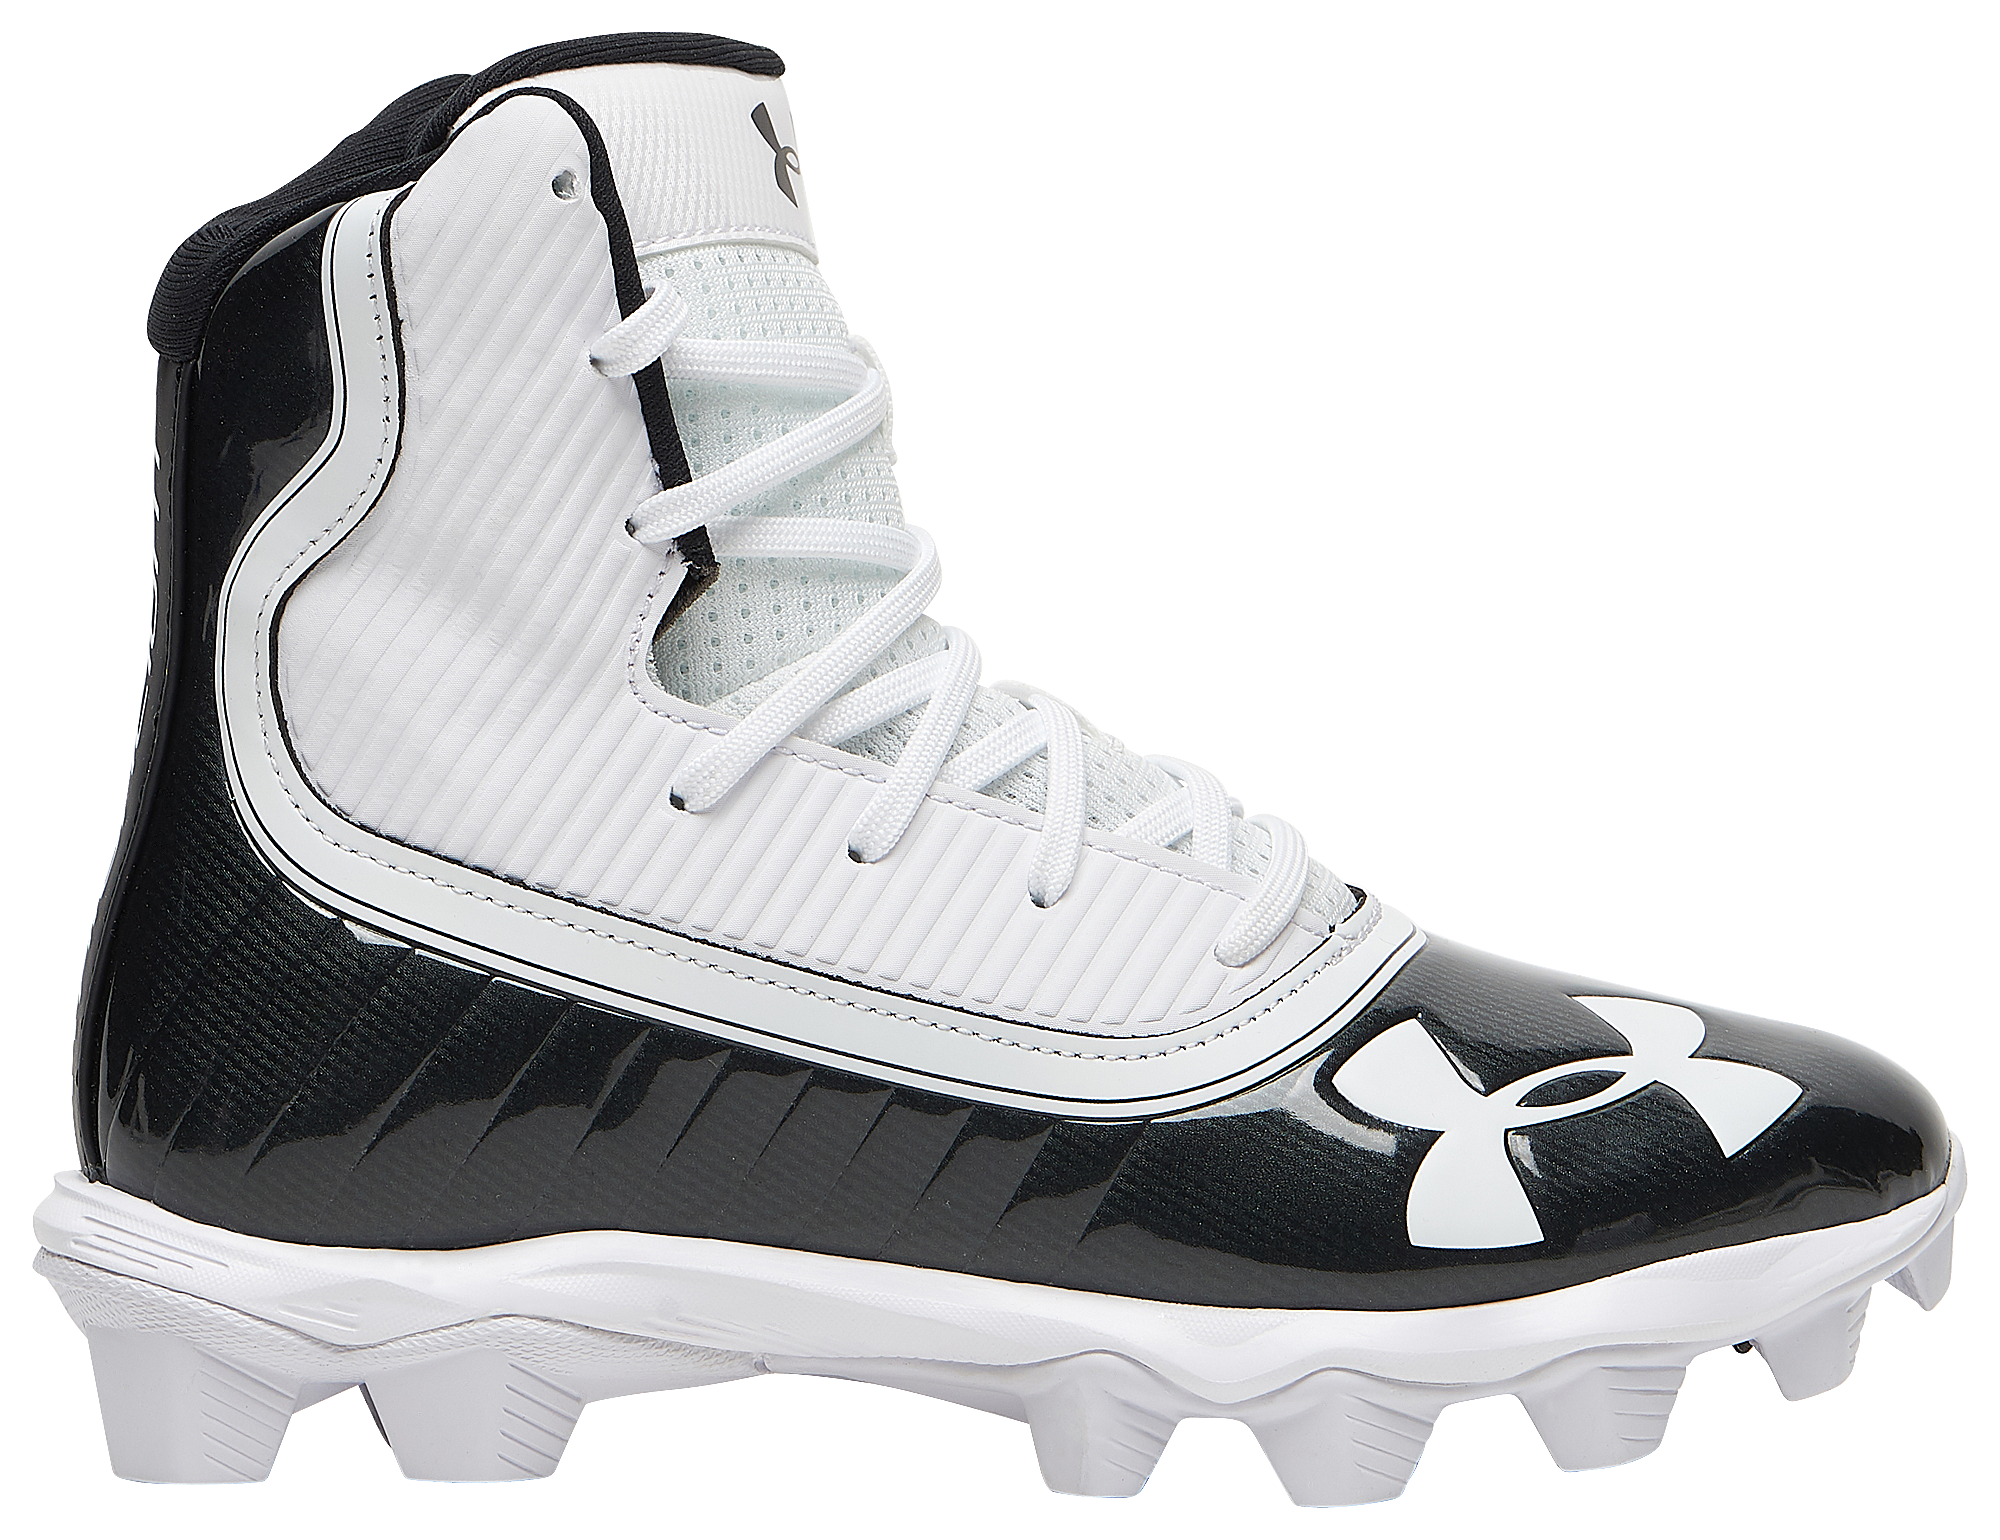 Youth Football Cleats | Eastbay